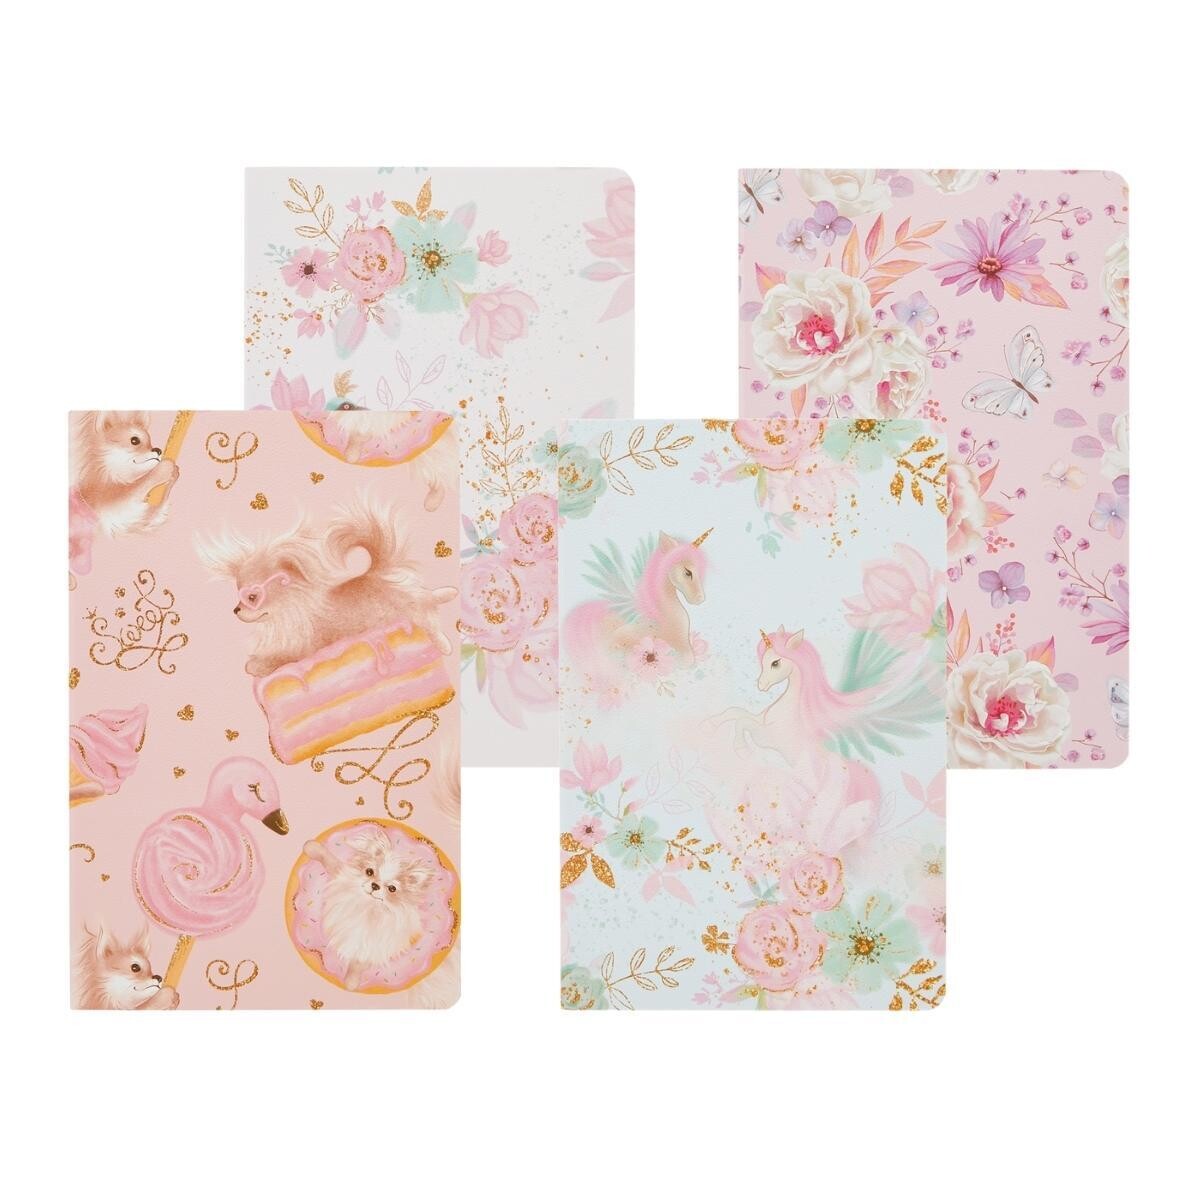 Everything Pretty - Set of 4 Softbound Lined Journal A5 Notebook